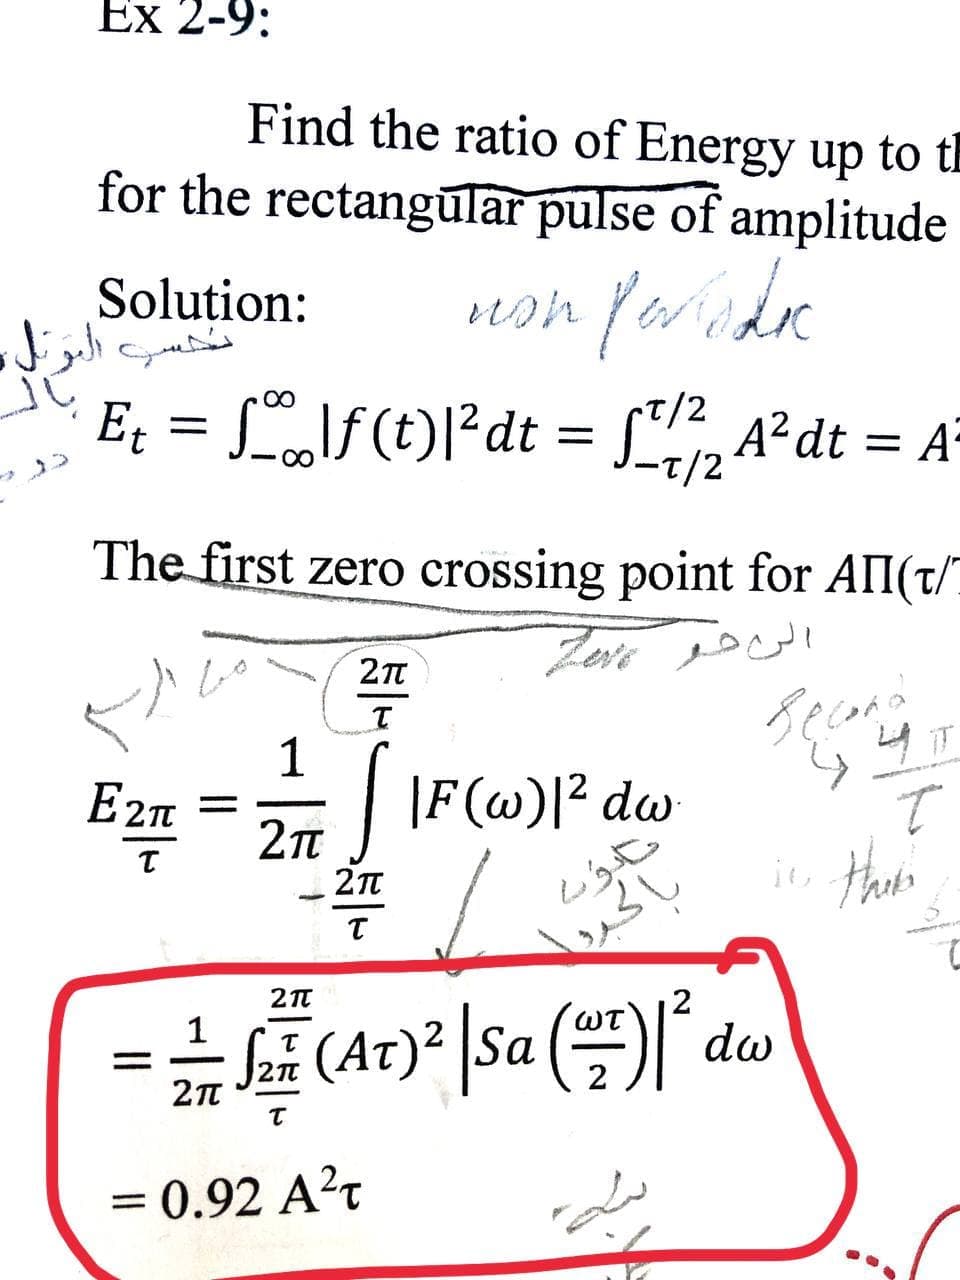 Ex 2-9:
Find the ratio of Energy up to th
for the rectangūlar pulse of amplitude
non forude
Solution:
مس الرئلو
E = S\f(t)l°dt = [", A²dt = A°
T/2
00
-디/2
The first zero crossing point for AII(t/
Secand
1
E2n =
IF(@)? dw
- 27
1
WT
SE (At)² \Sa ()
dw
= 0.92 A²t
